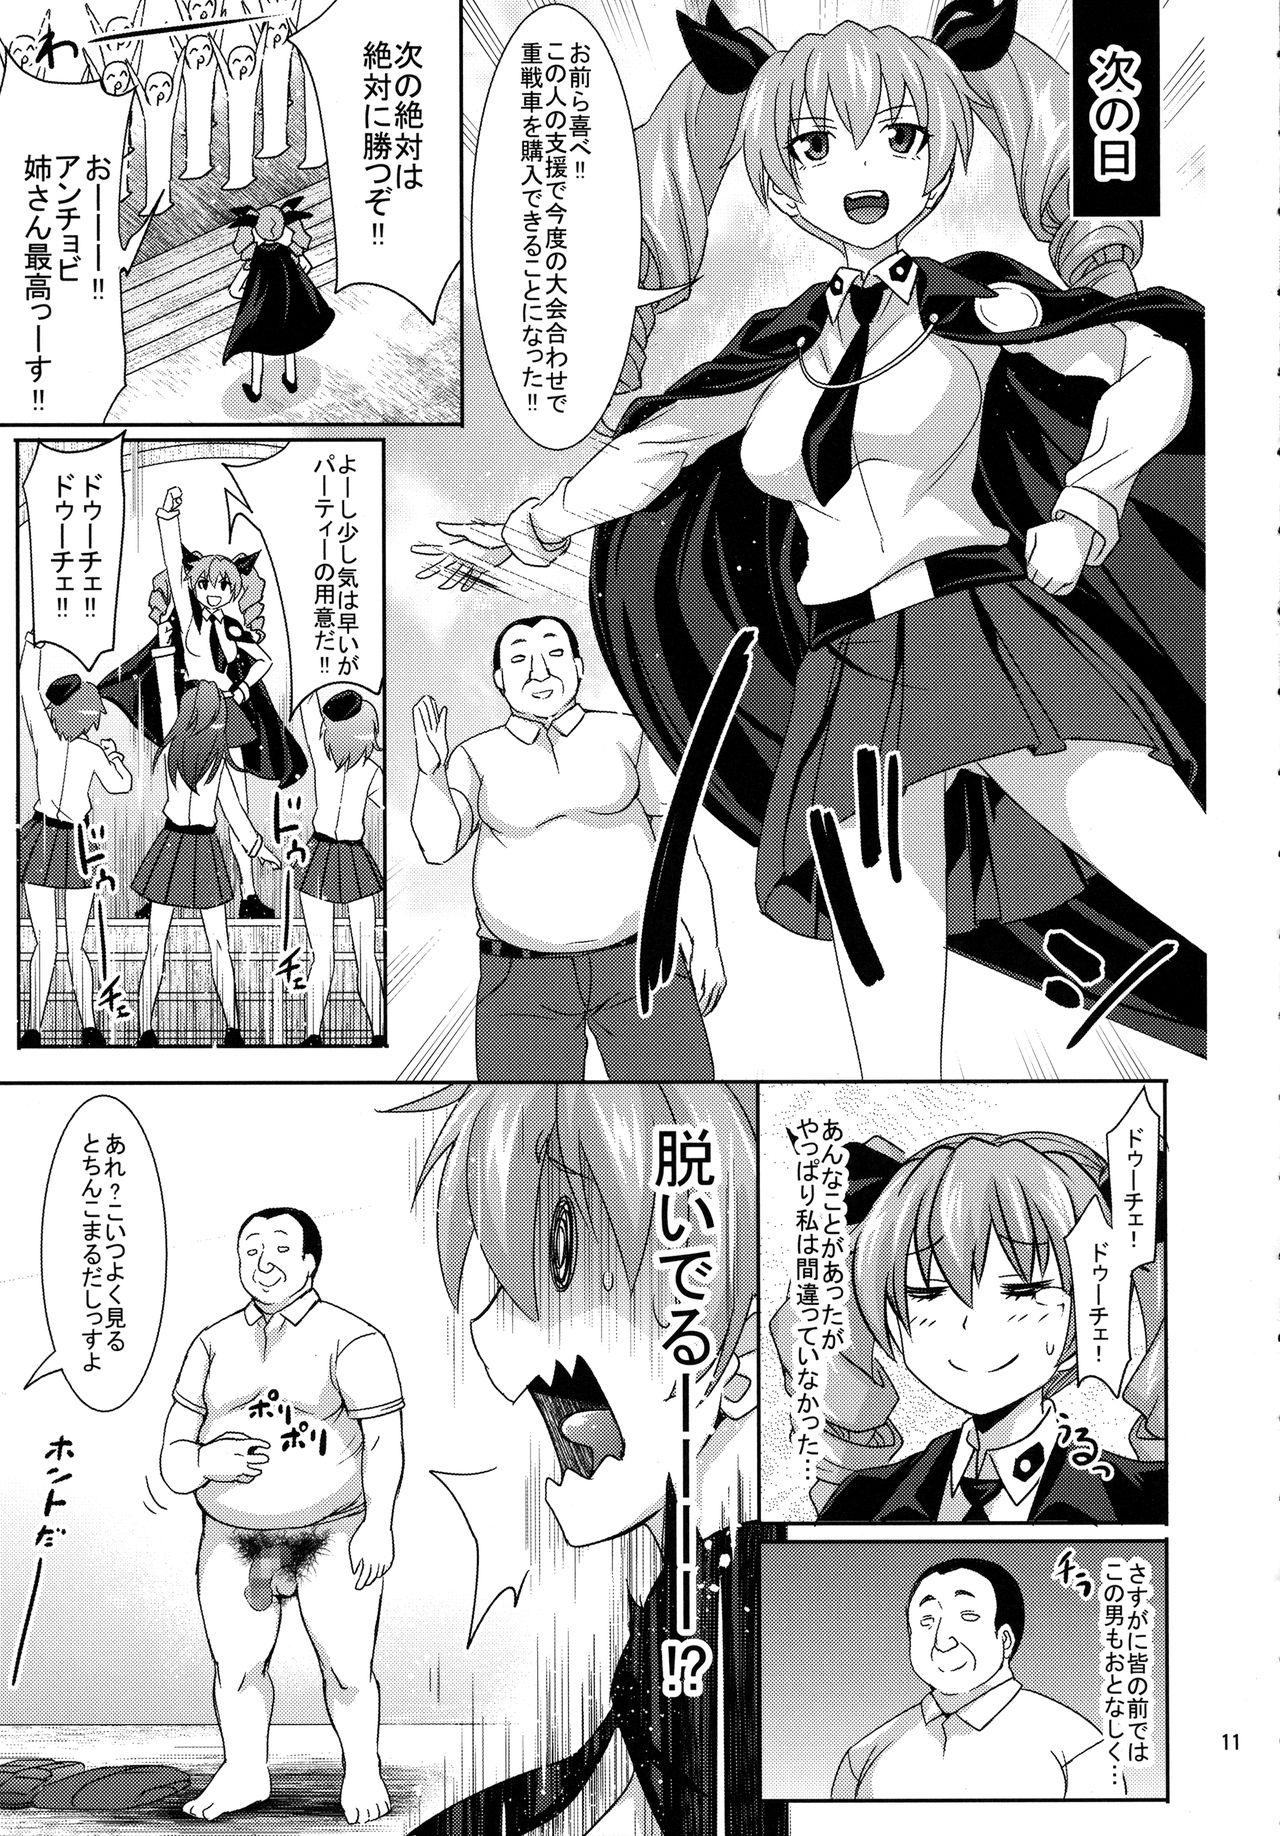 Delicia Anchovy to Duce! Duce! - Girls und panzer Oiled - Page 10